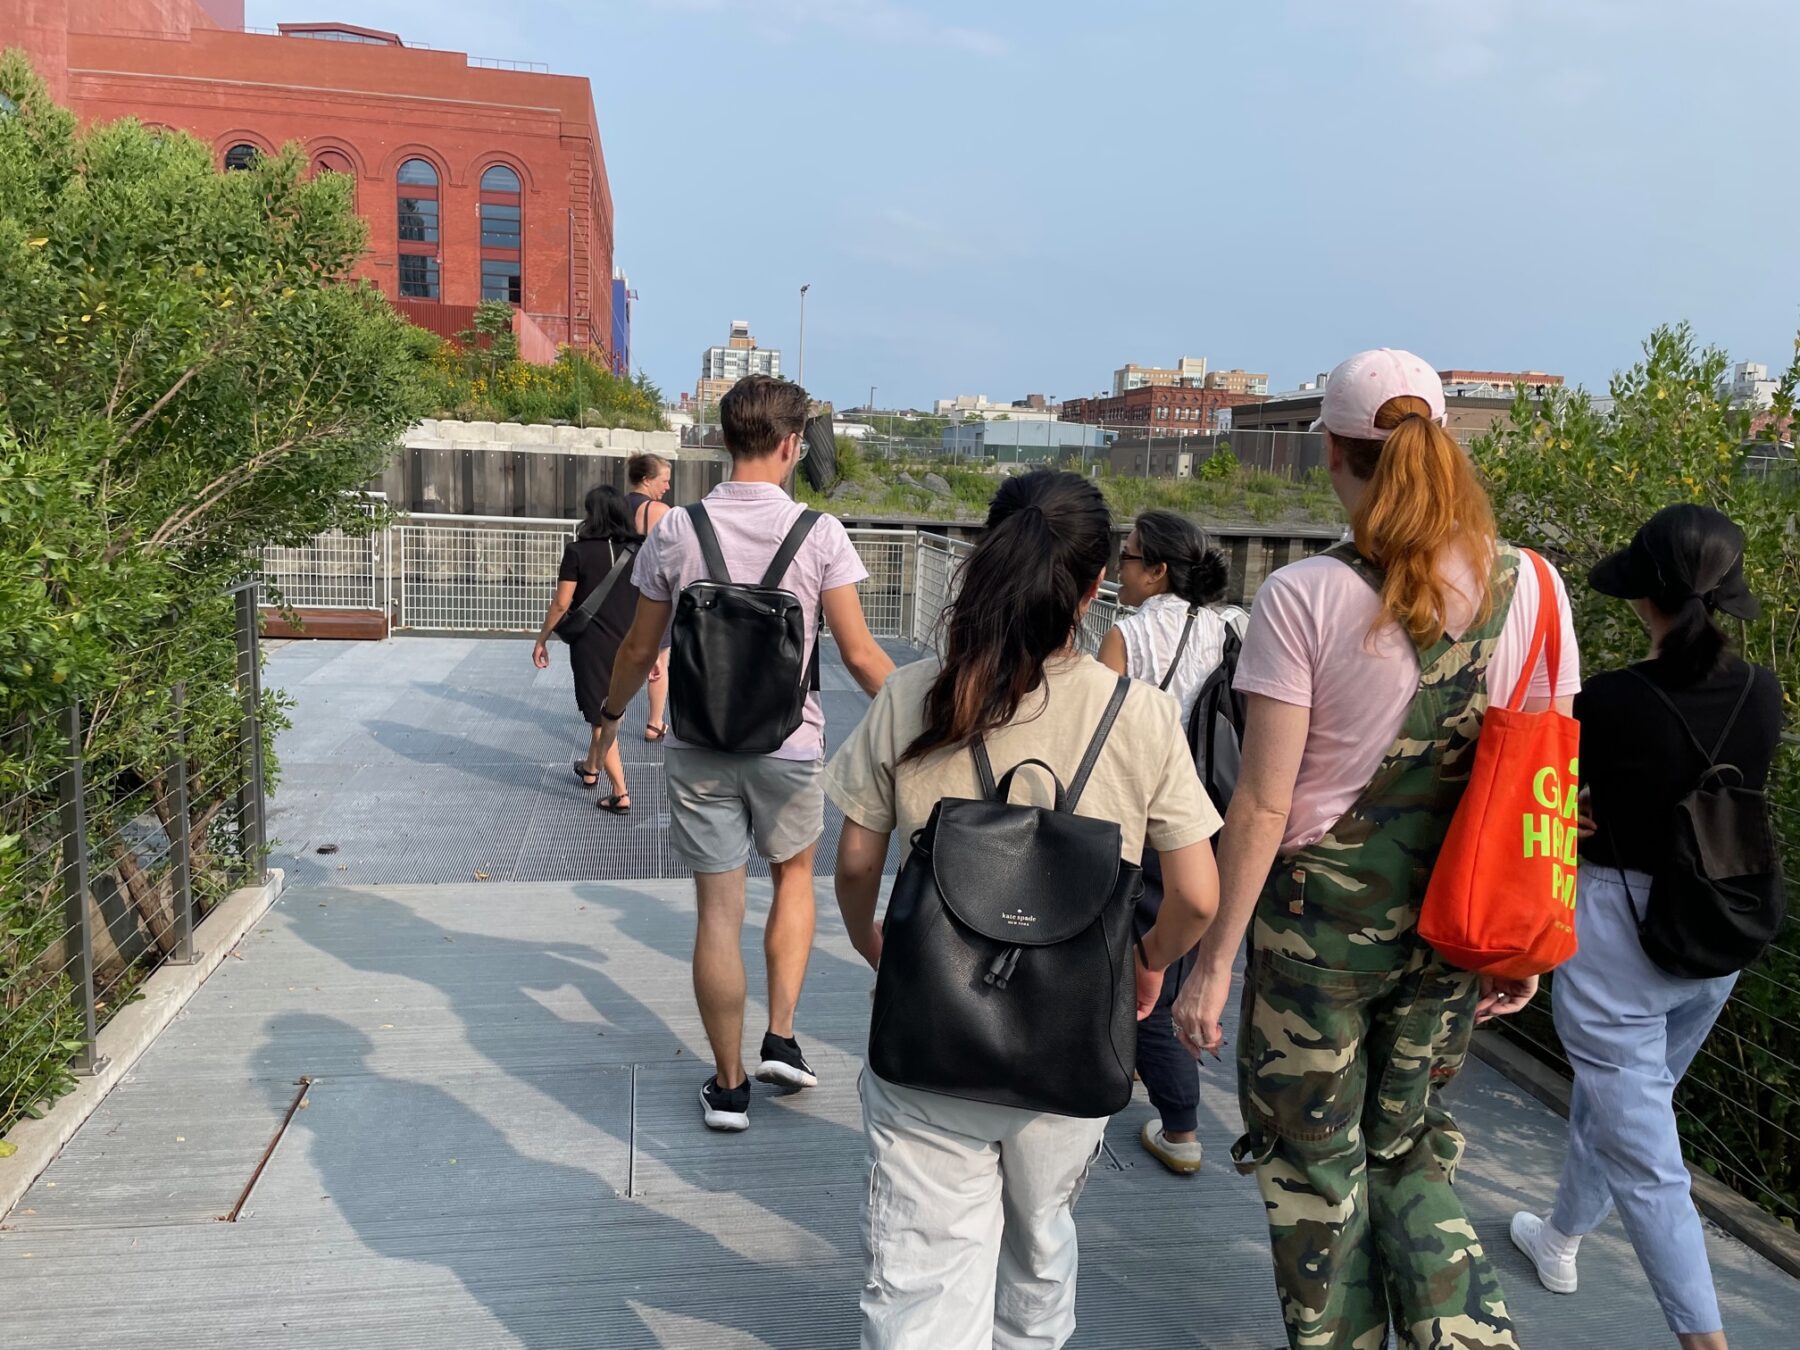 small group in hats and backpacks crosses a pedestrian bridge